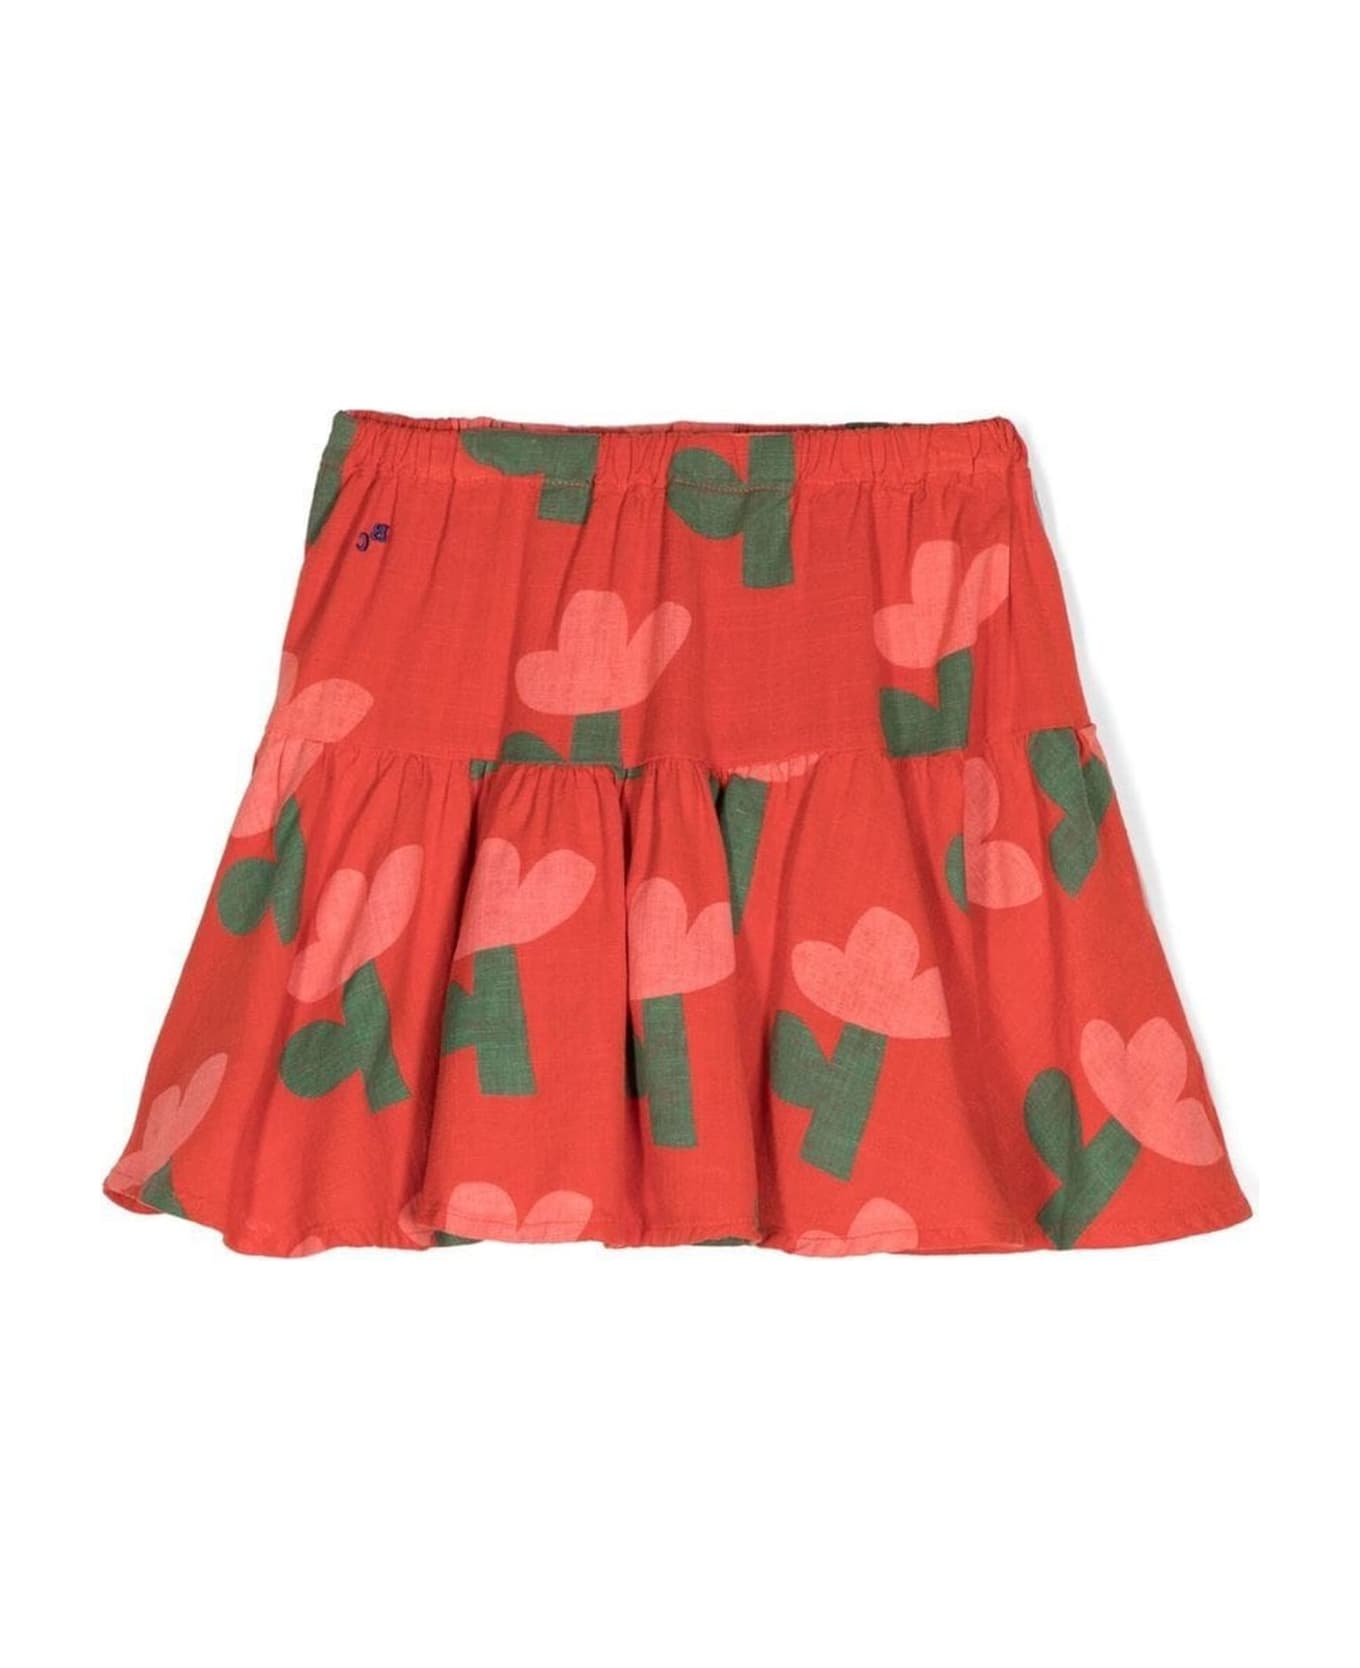 Bobo Choses Skirts Red - Red ボトムス